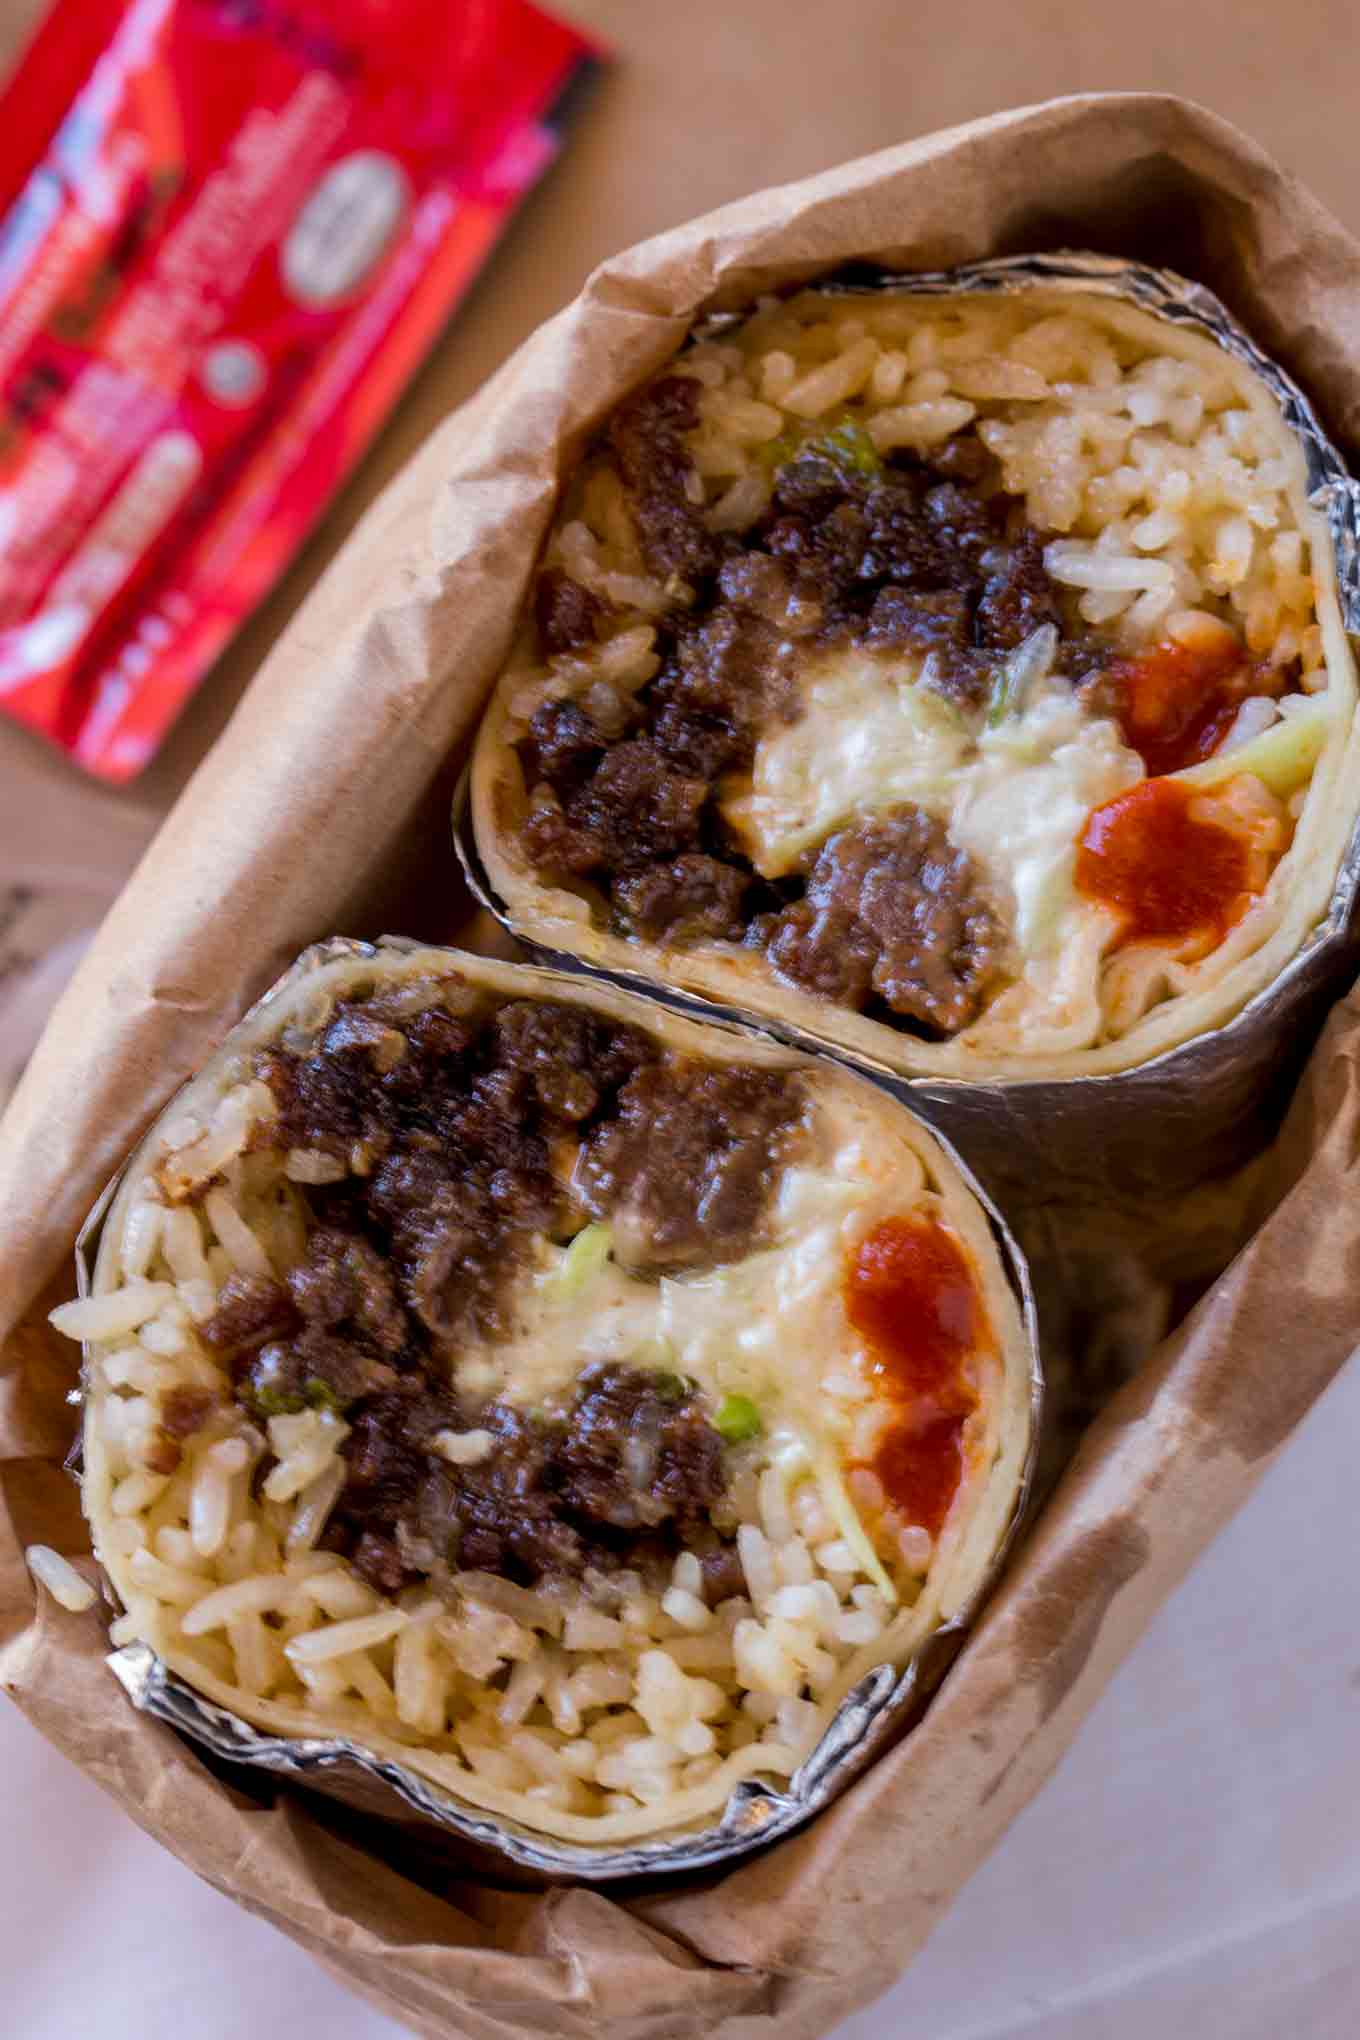 Mongolian Beef Burrito made with ground Mongolian beef, seasoned rice, Sriracha and a quick Asian mayo slaw. It's the best burrito you've had since Kogi bbq came on the scene.